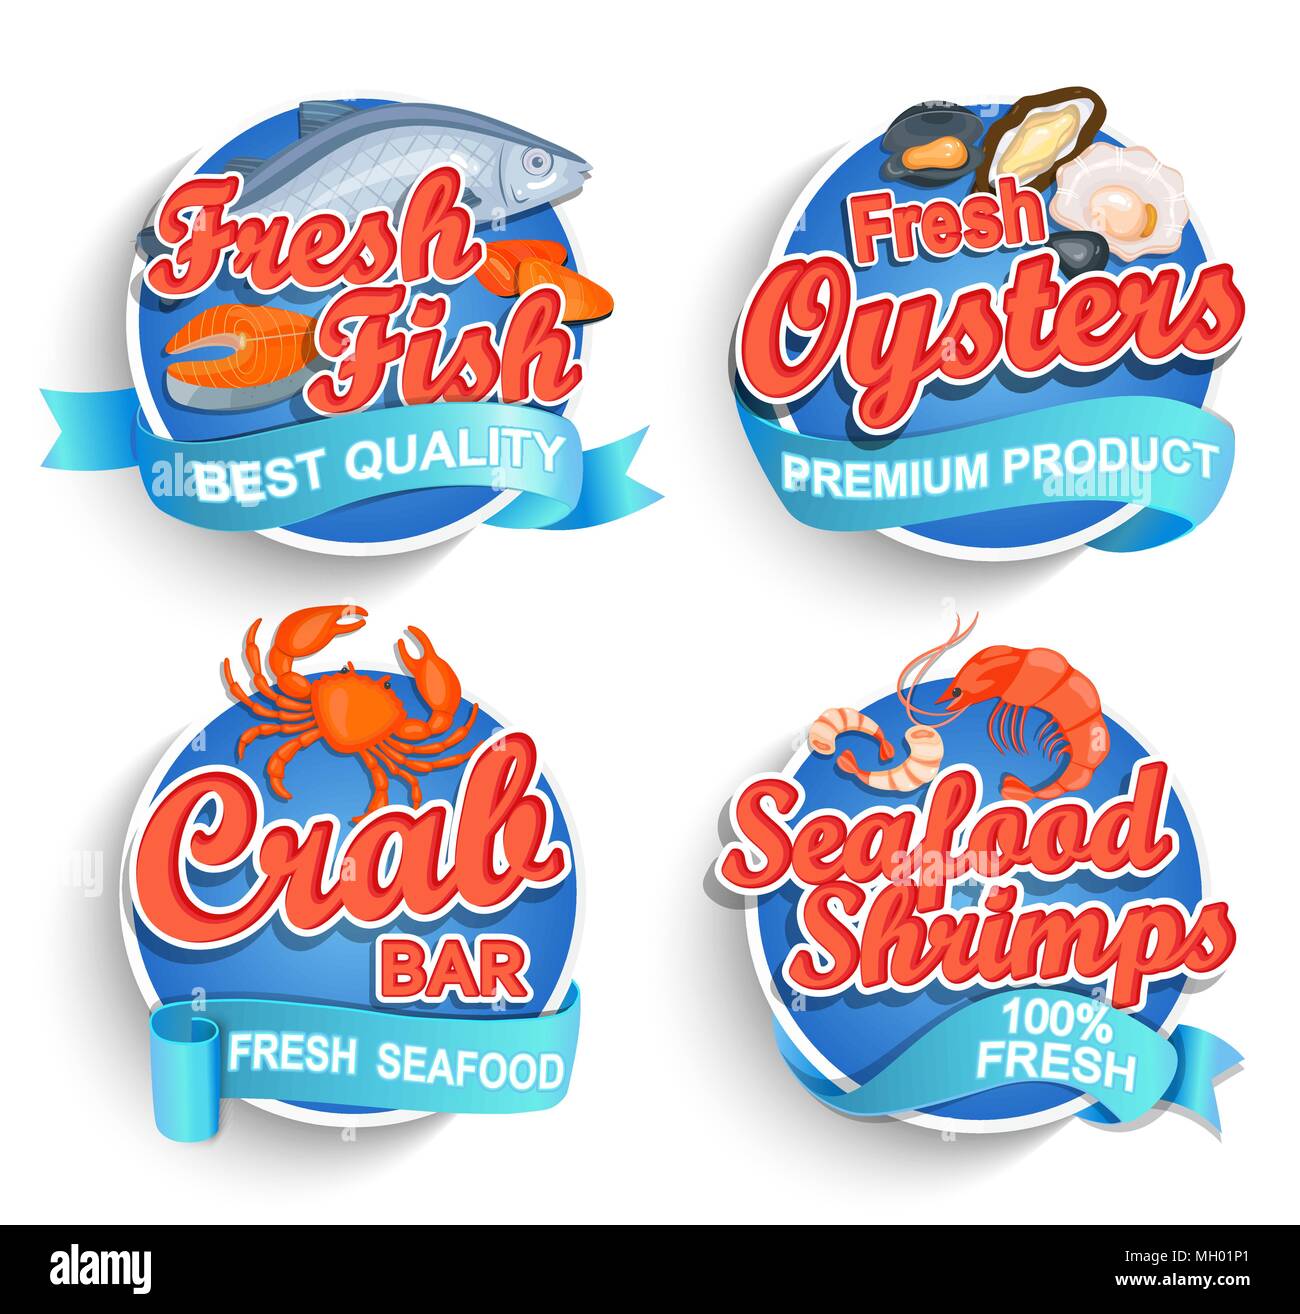 Set of fresh seafood logo and emblems. Fresh fish, oysters, shrimps and crab bar. Vector illustration. For markets, shops and your design. Stock Vector